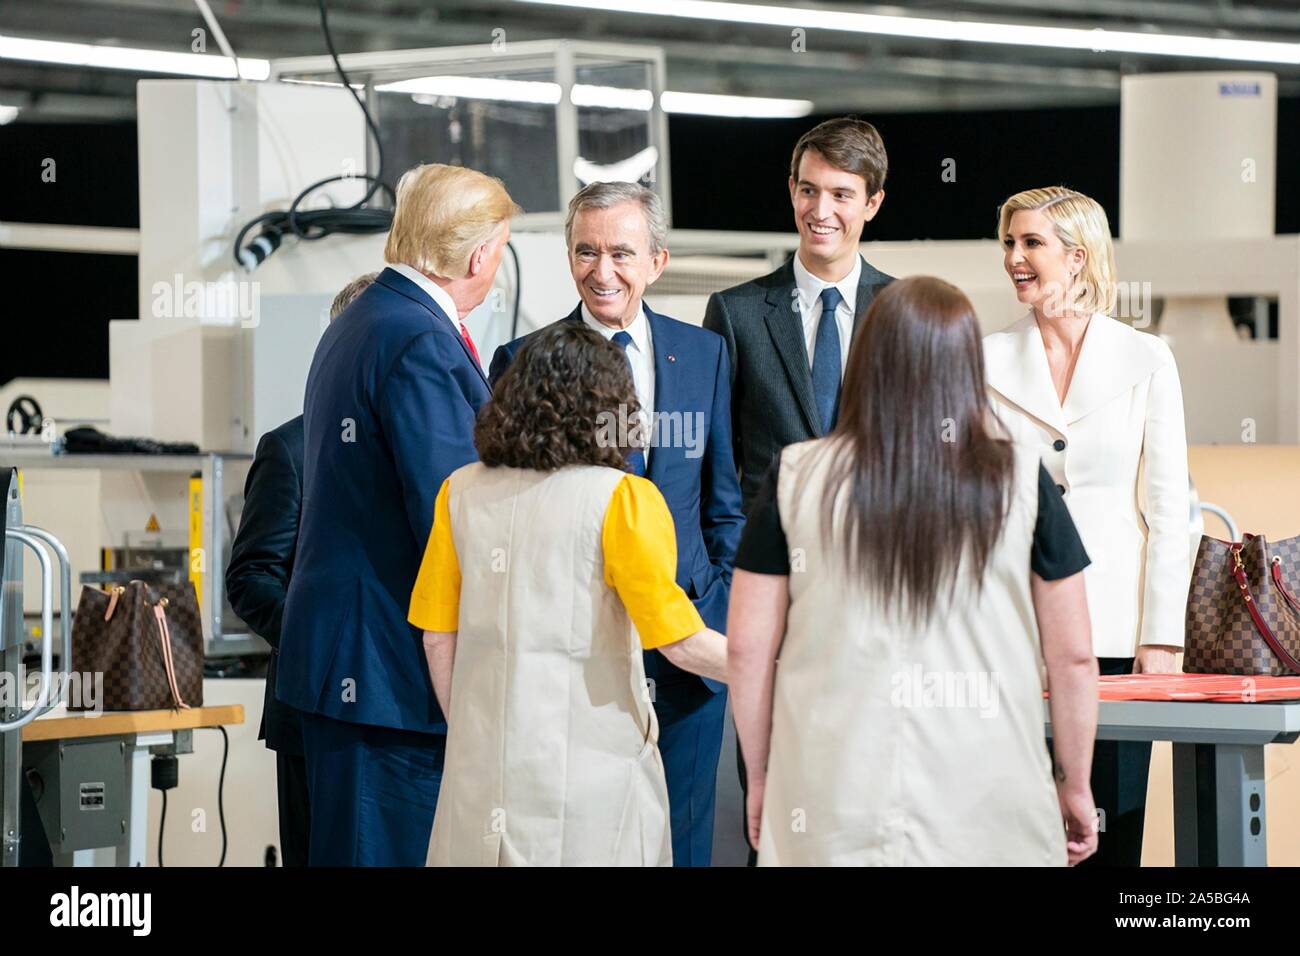 U.S President Donald Trump, left, tours the newly opened Louis Vuitton Workshop Rochambeau October 17, 2019 in Alvarado, Texas. Joining the president from left to right are: Bernard Arnault, chief executive of LVMH, Alexandre Arnault, and daughter Ivanka Trump. Stock Photo